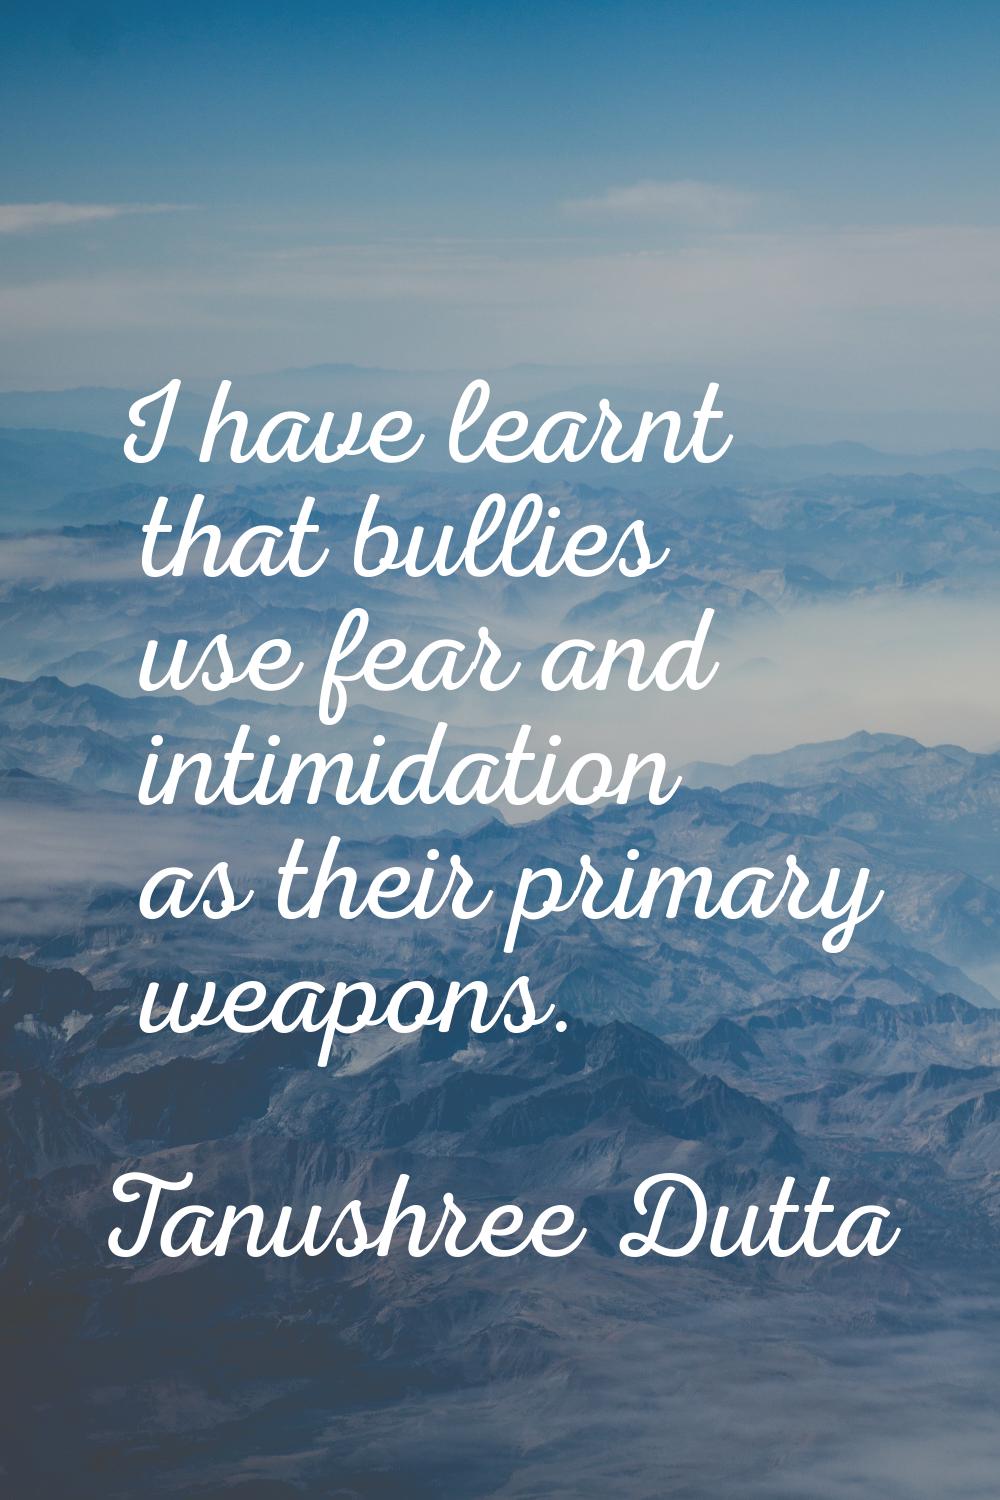 I have learnt that bullies use fear and intimidation as their primary weapons.